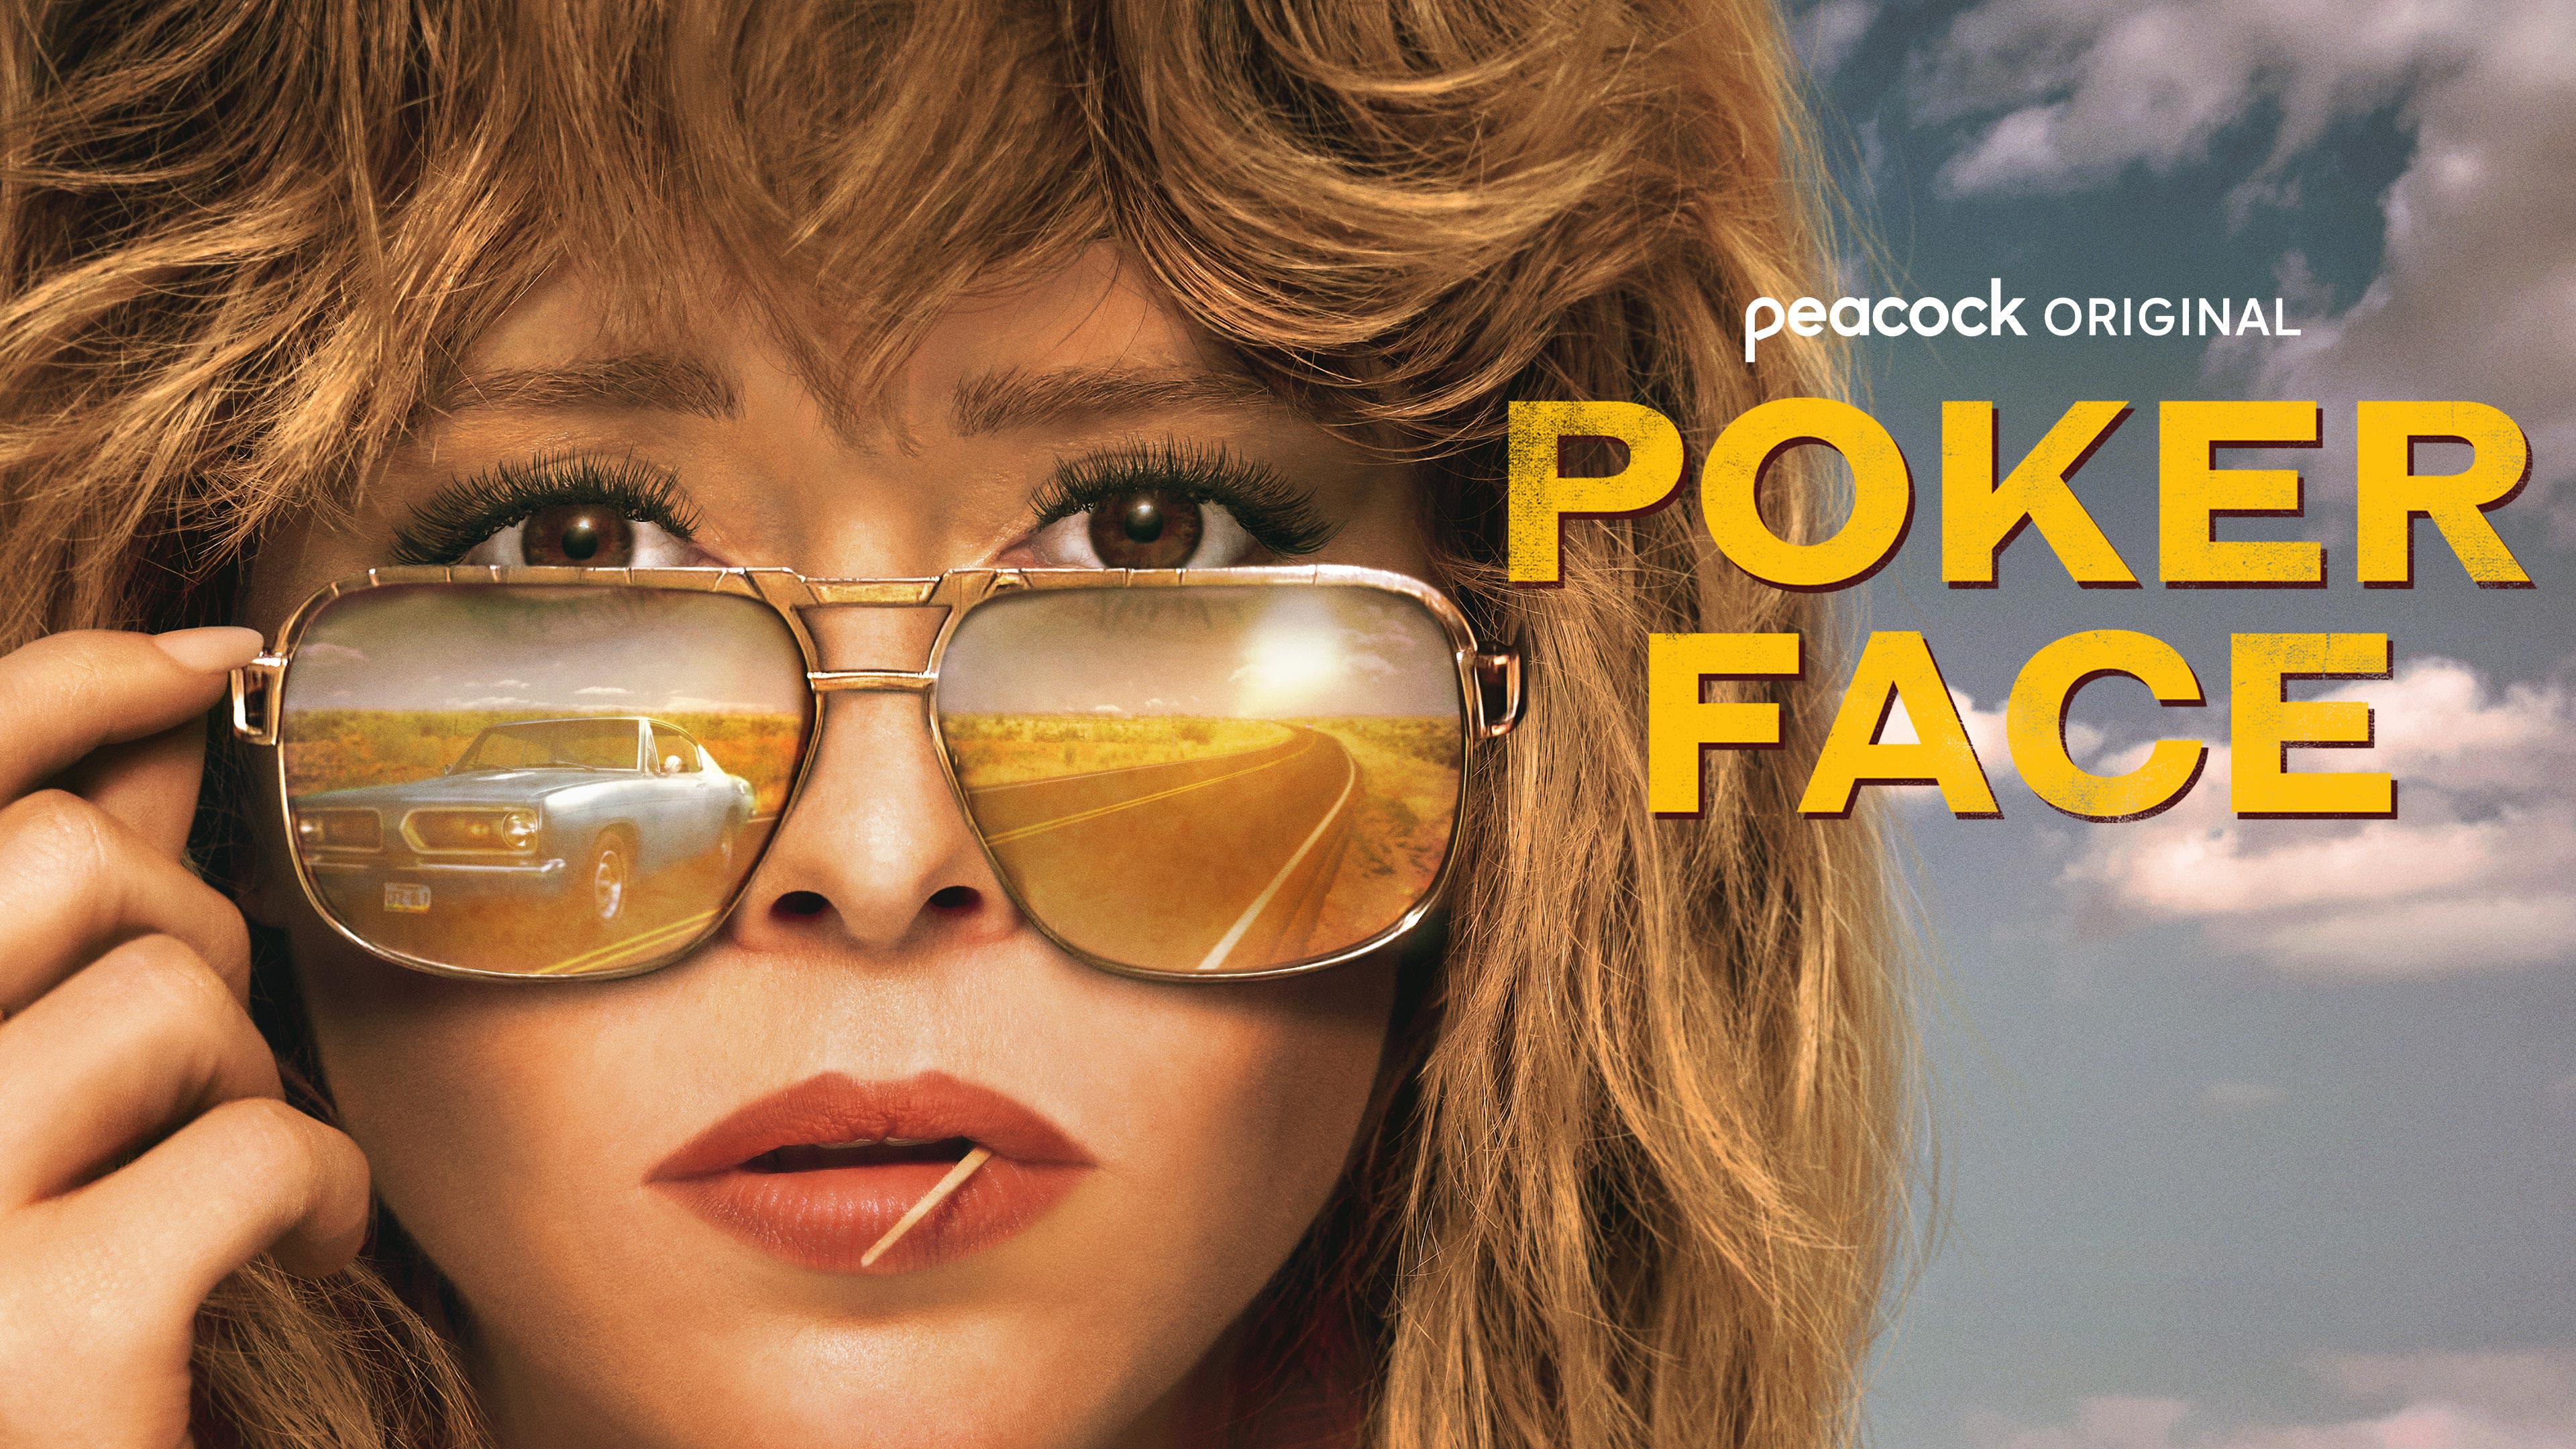 Rian Johnson Offers a Modern Take on Retro Mystery With 'Poker Face